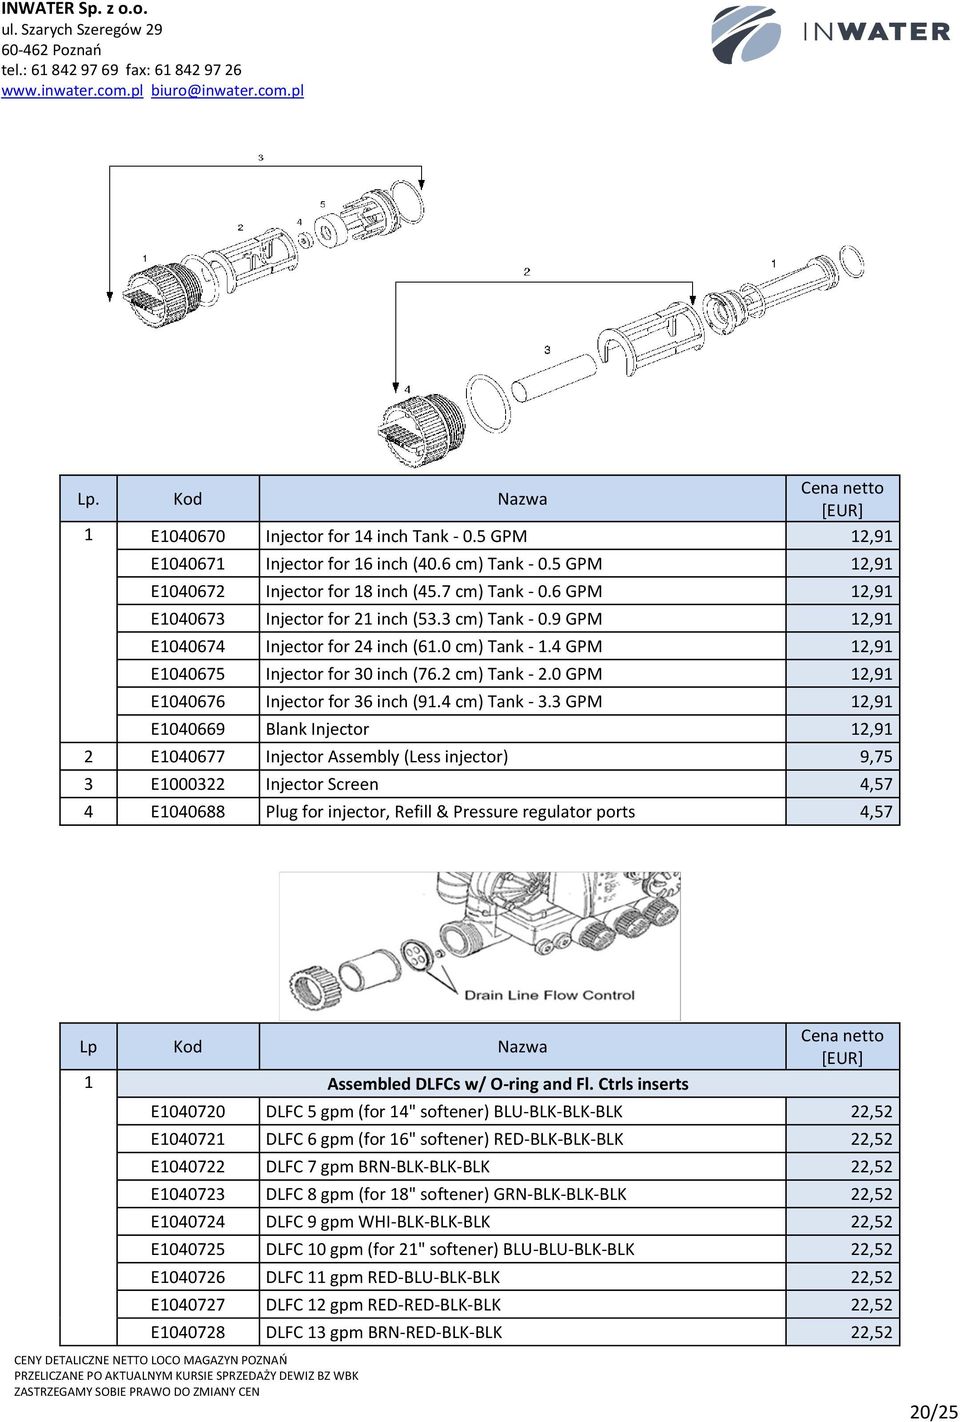 0 GPM 12,91 E1040676 Injector for 36 inch (91.4 cm) Tank - 3.